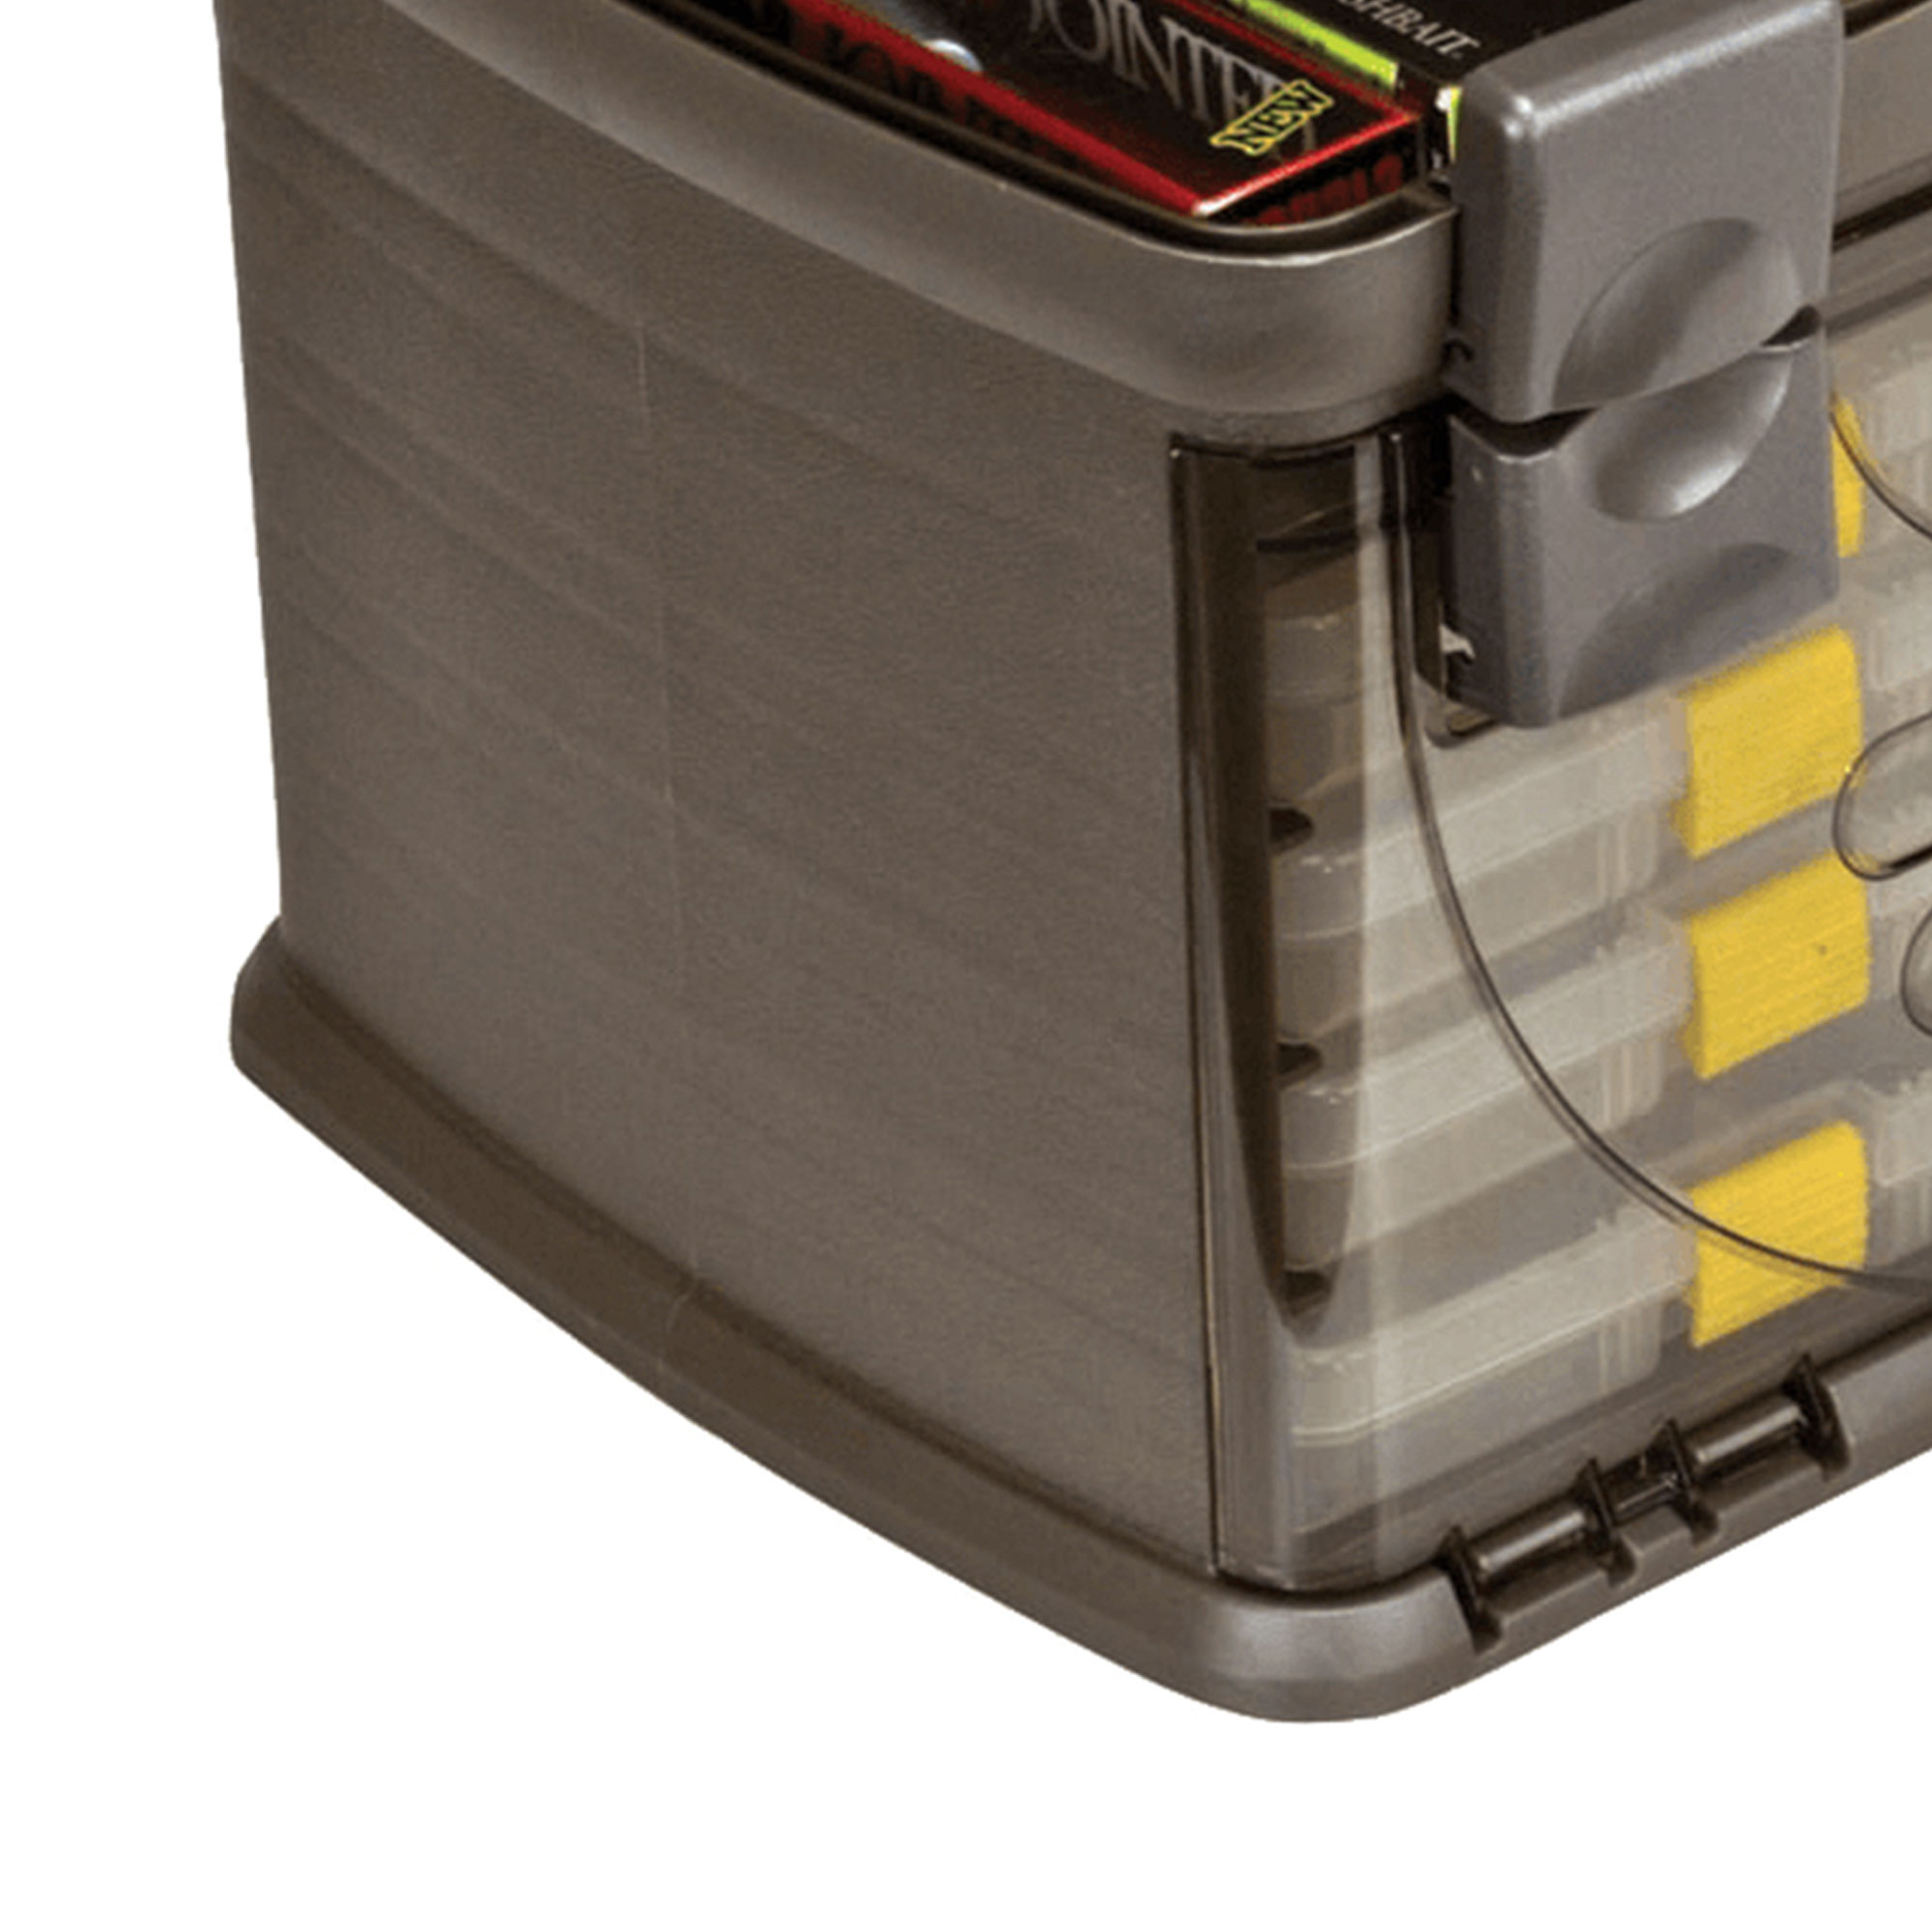 Plano Fishing Guide Series Five Utility Pro System Tackle Box, Graphite / Sandstone - image 3 of 6